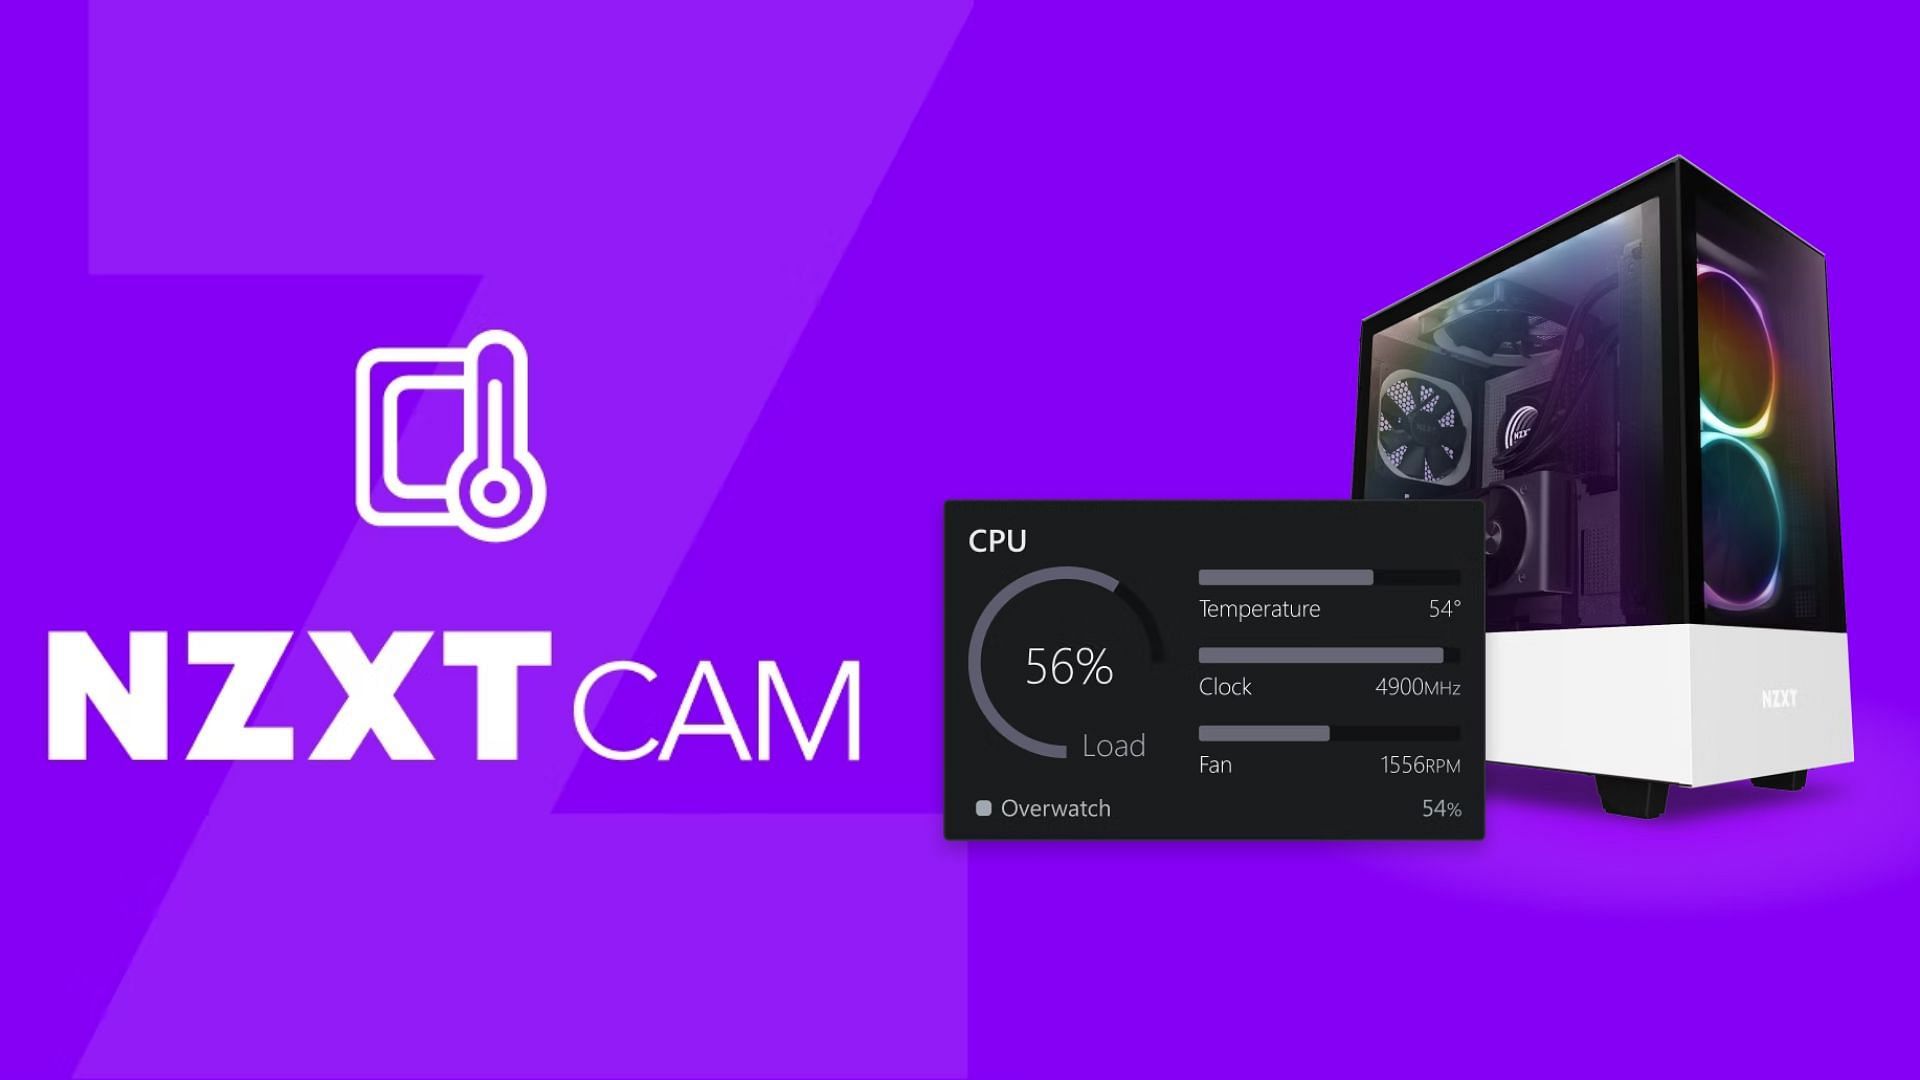 The NZXT CAM software (Image via NZXT)